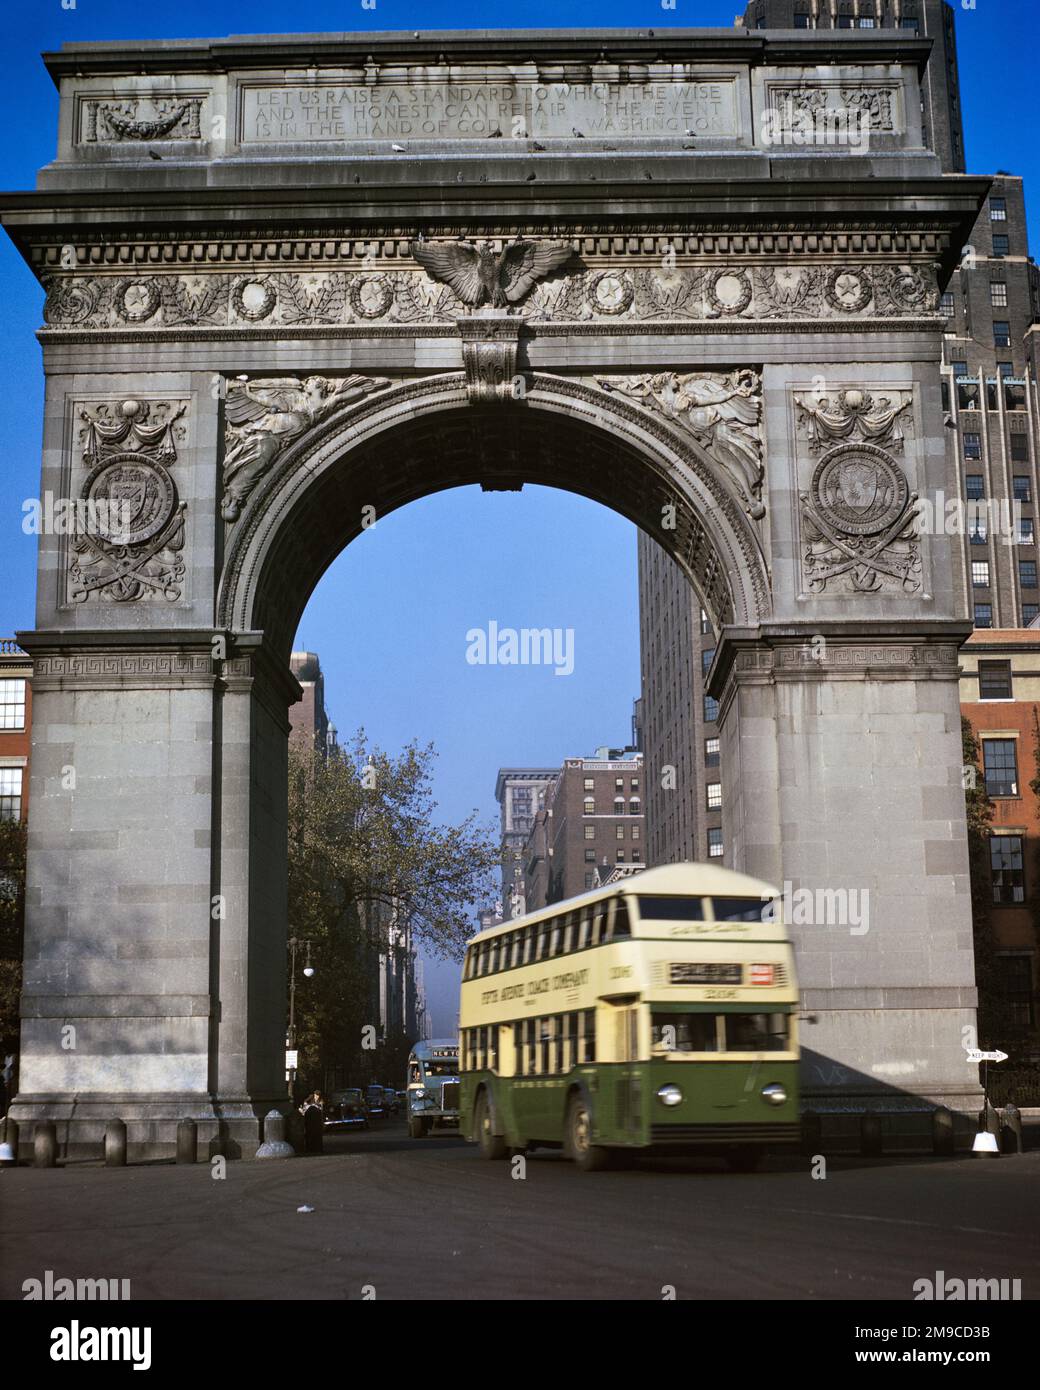 1940s WASHINGTON SQUARE ARCH GREENWICH VILLAGE WITH DOUBLE DECKER CITY FIFTH AVENUE BUS EMERGING - kr132338 CPC001 HARS PARKS NYC GREENWICH NEW YORK CITIES PUBLIC PARK GEORGE WASHINGTON NEW YORK CITY EMERGING BUSES CREATIVITY NYU TRANSIT DECKER MOTOR VEHICLES OLD FASHIONED Stock Photo